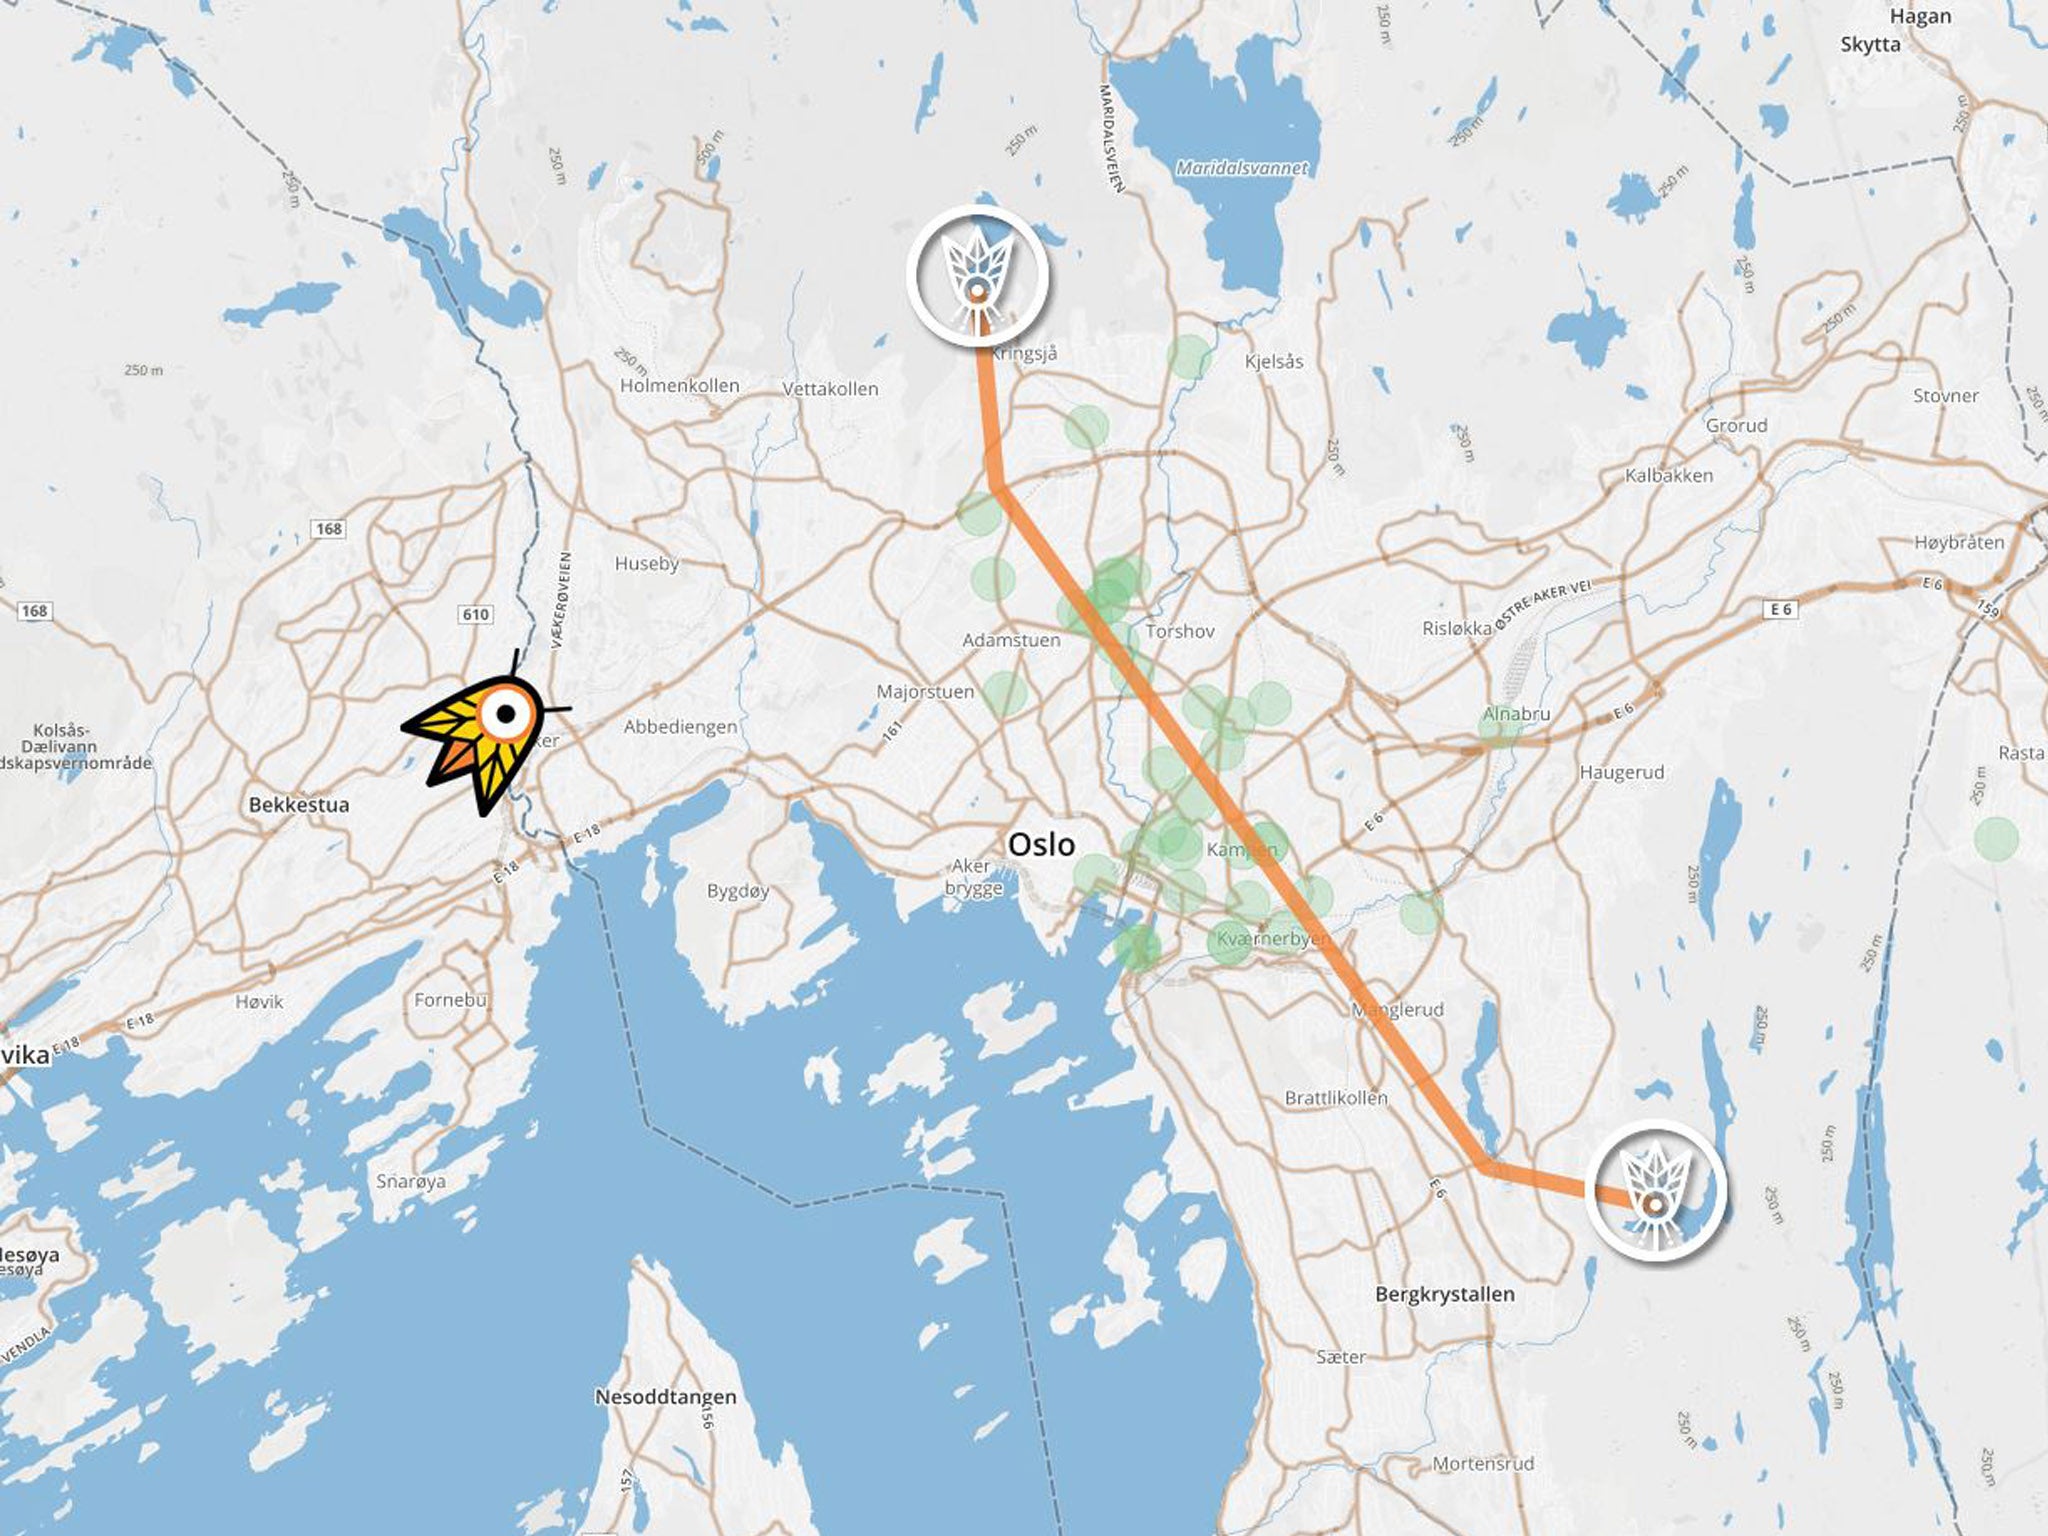 The location of bee "stops" along the highway are being mapped on the website pollinatorpassasjen.no, and users are being encouraged to join.